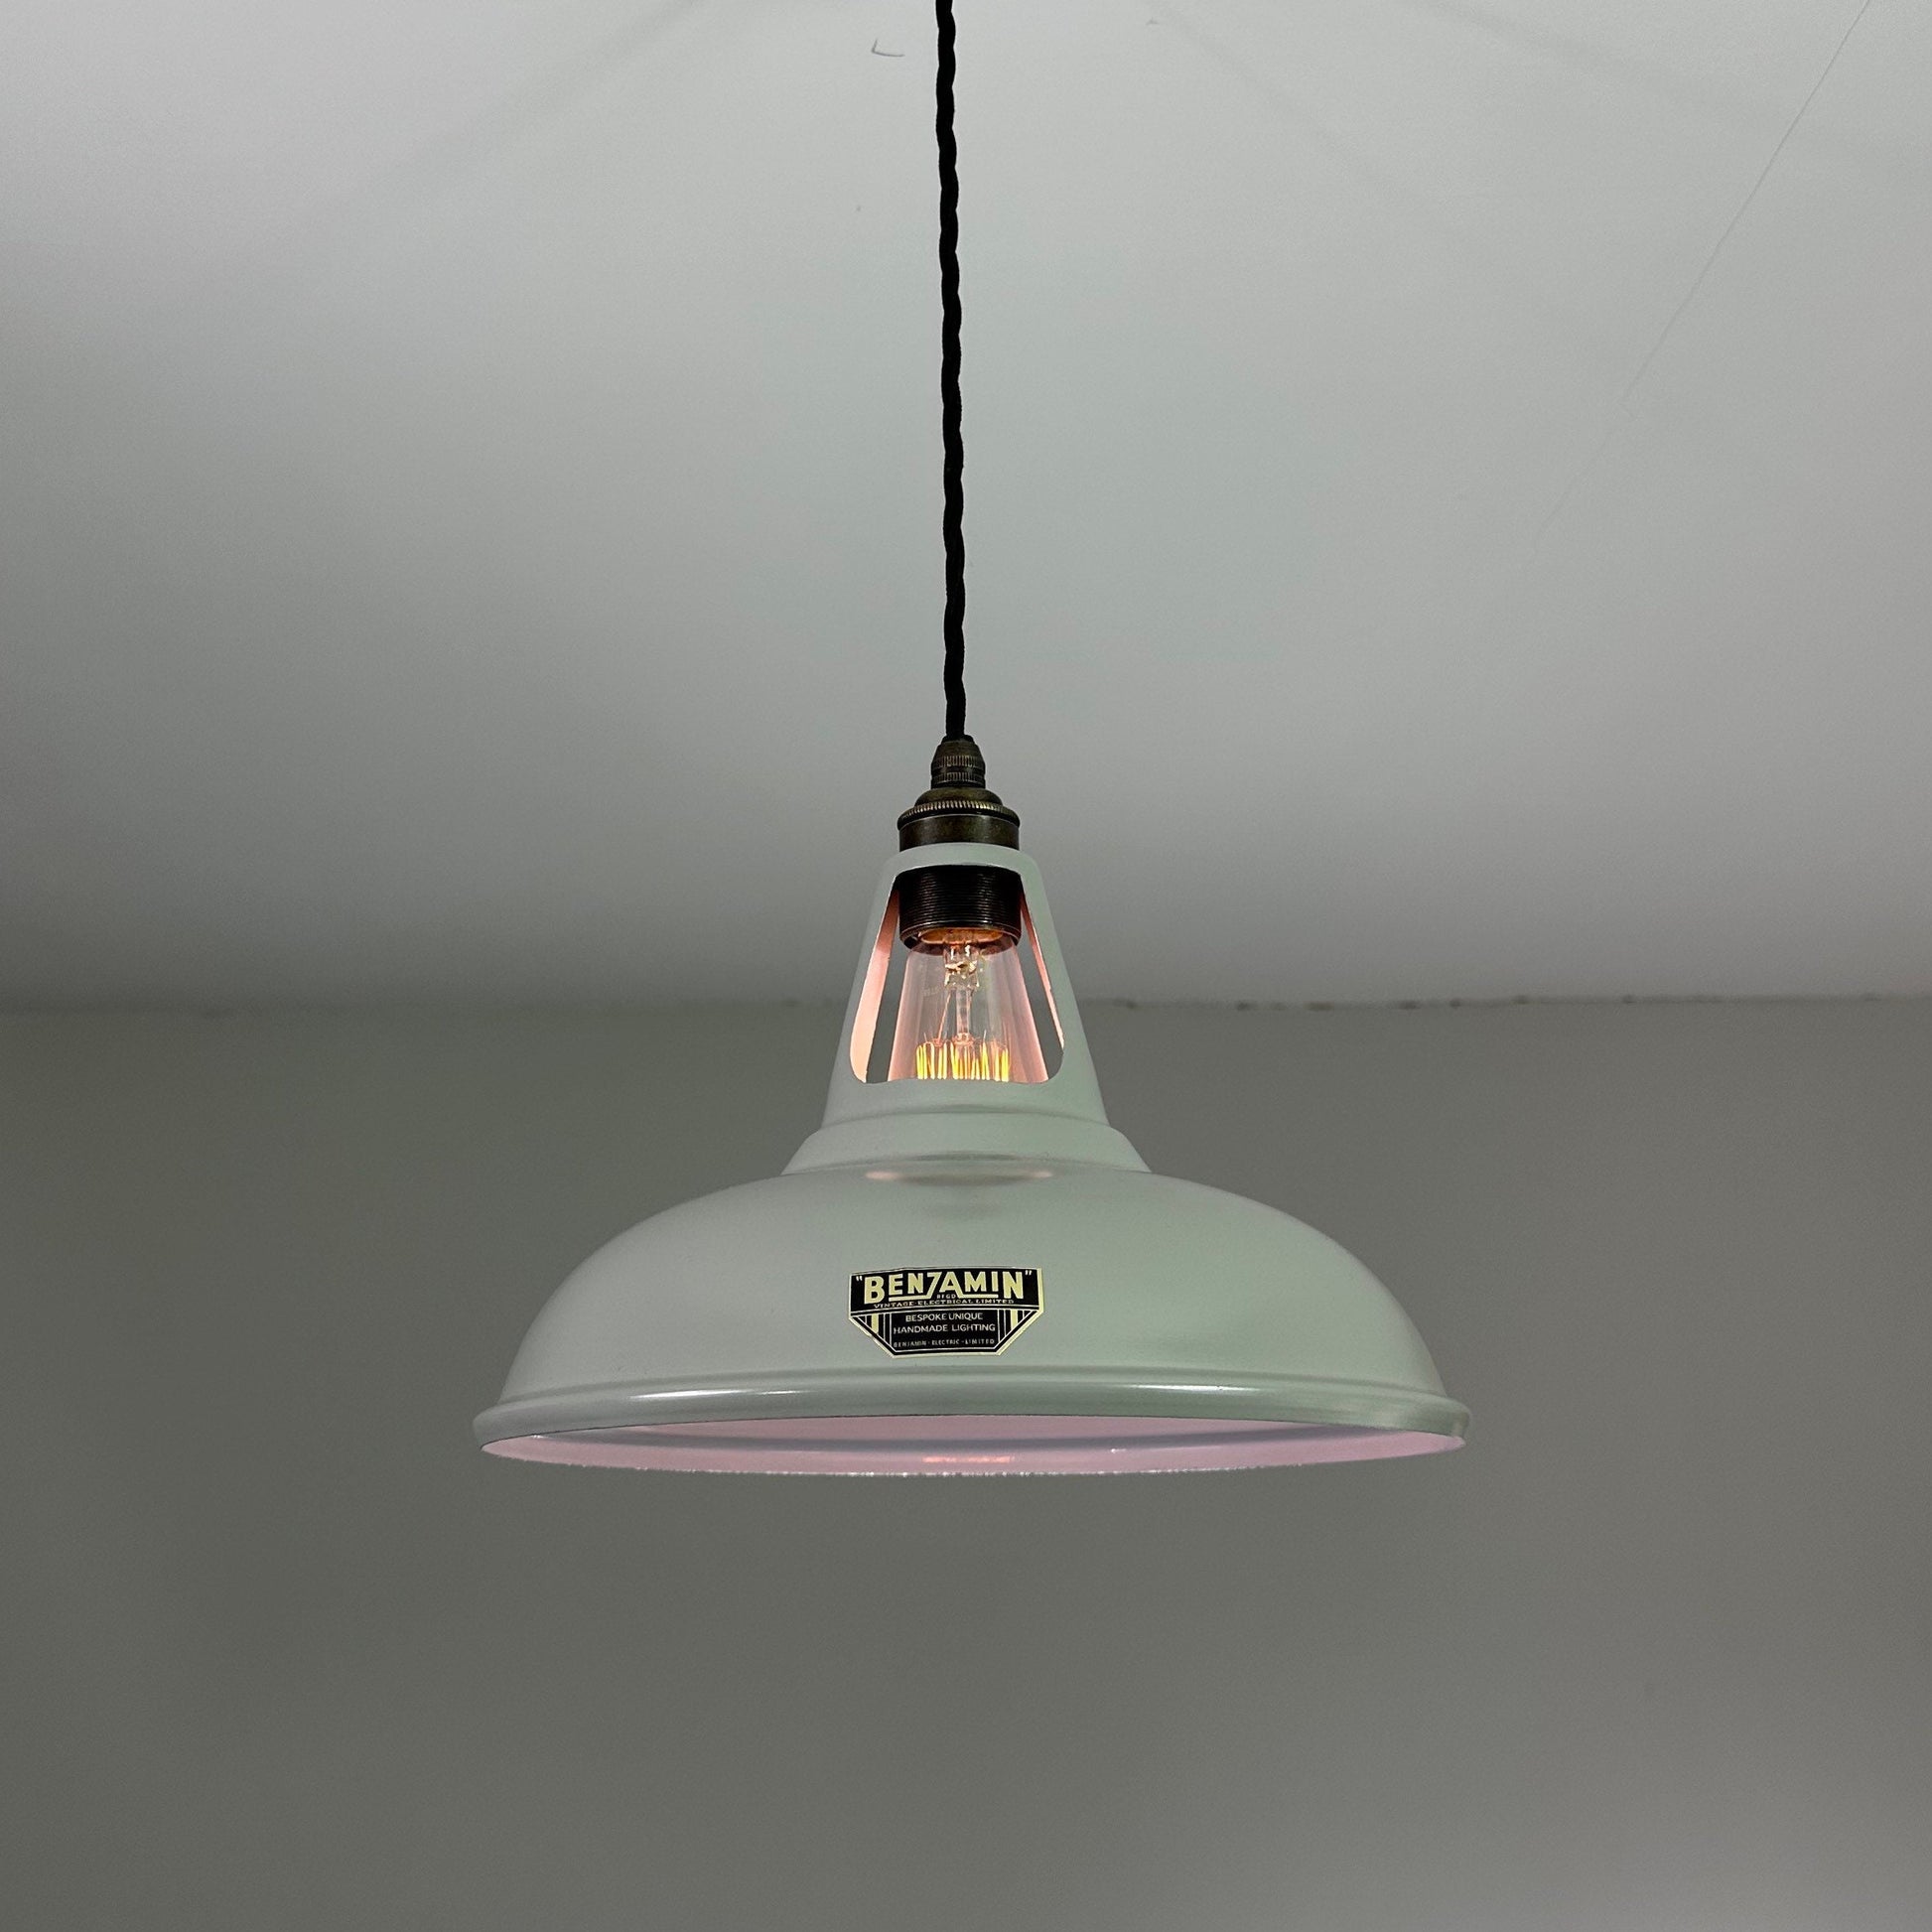 Cawston ~ Grey Solid Shade Slotted DesignPendant Set Light | Ceiling Dining Room | Kitchen Table | Vintage Filament Bulb 11 Inch